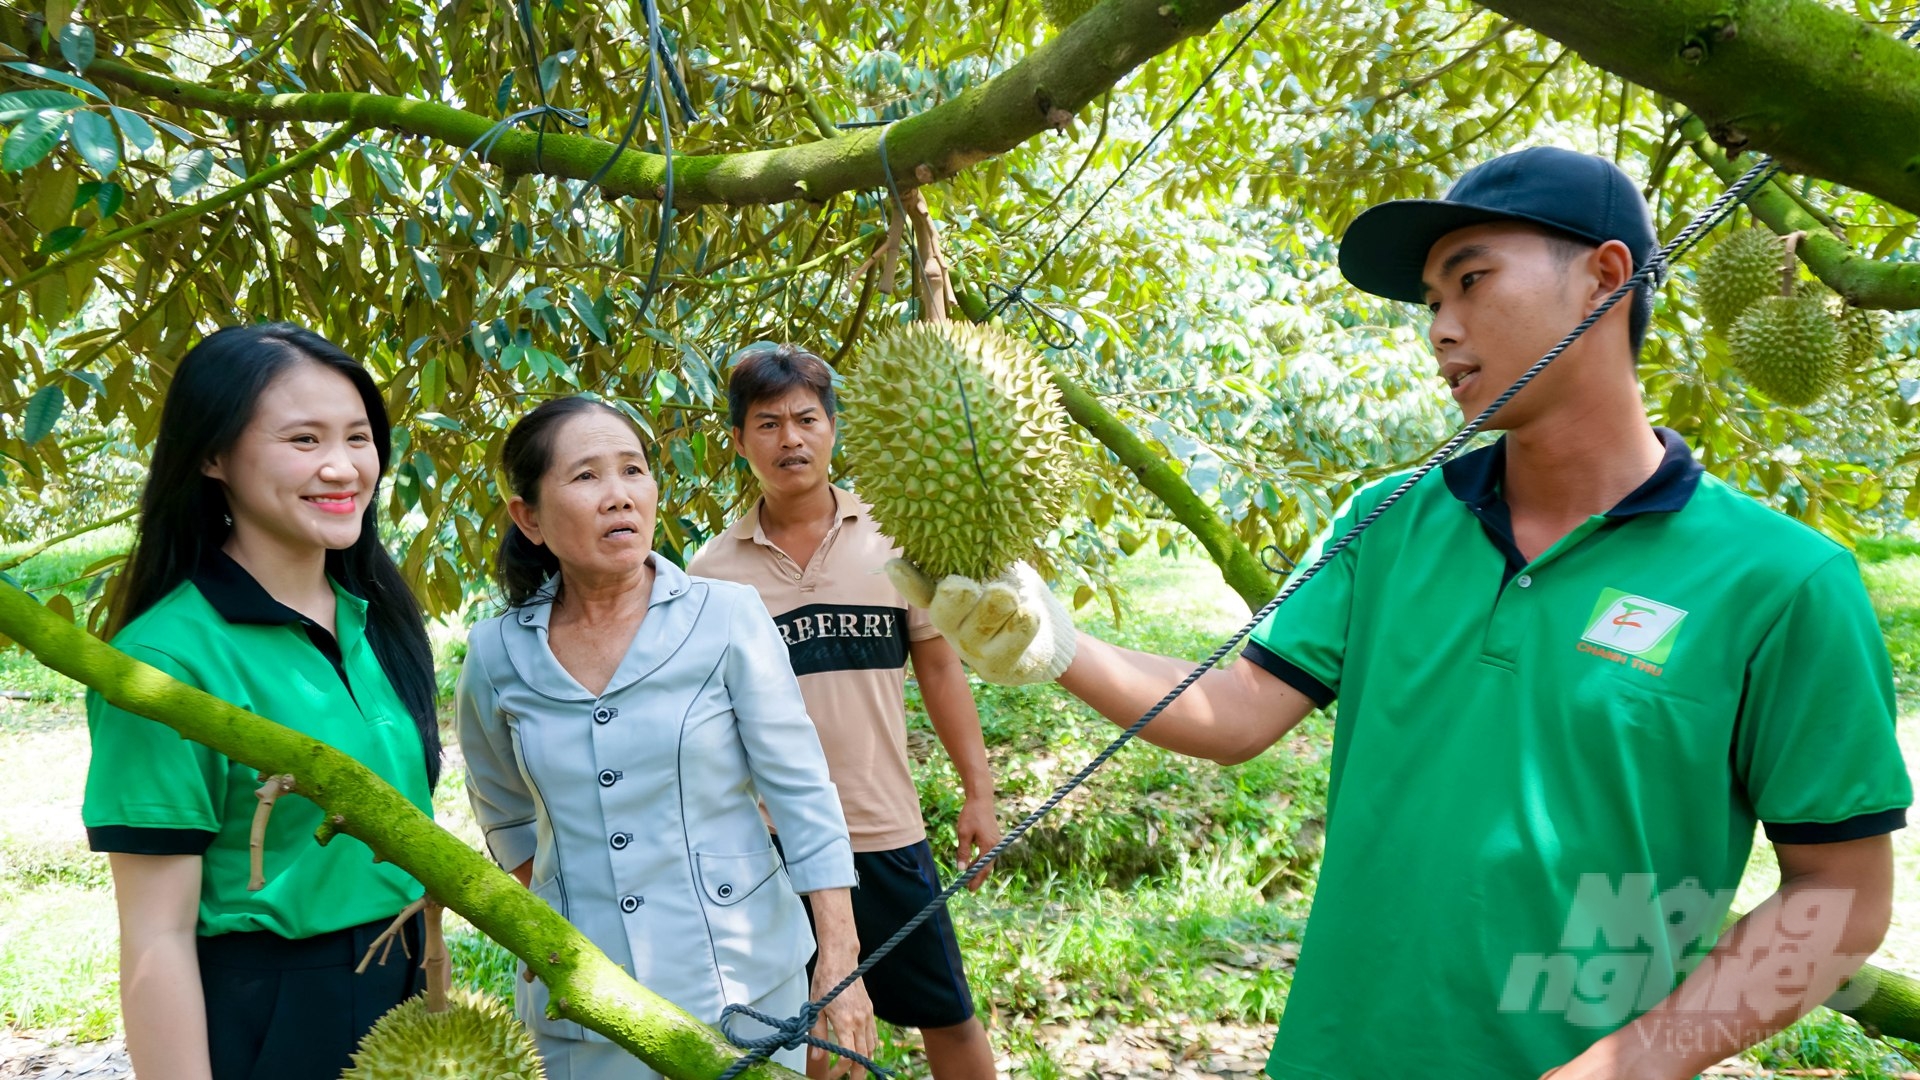 Bau Don commune, Go Dau district is considered the 'capital' of durian in Tay Ninh province with more than 1,000 hectares of this fruit. Photo: Tran Trung.